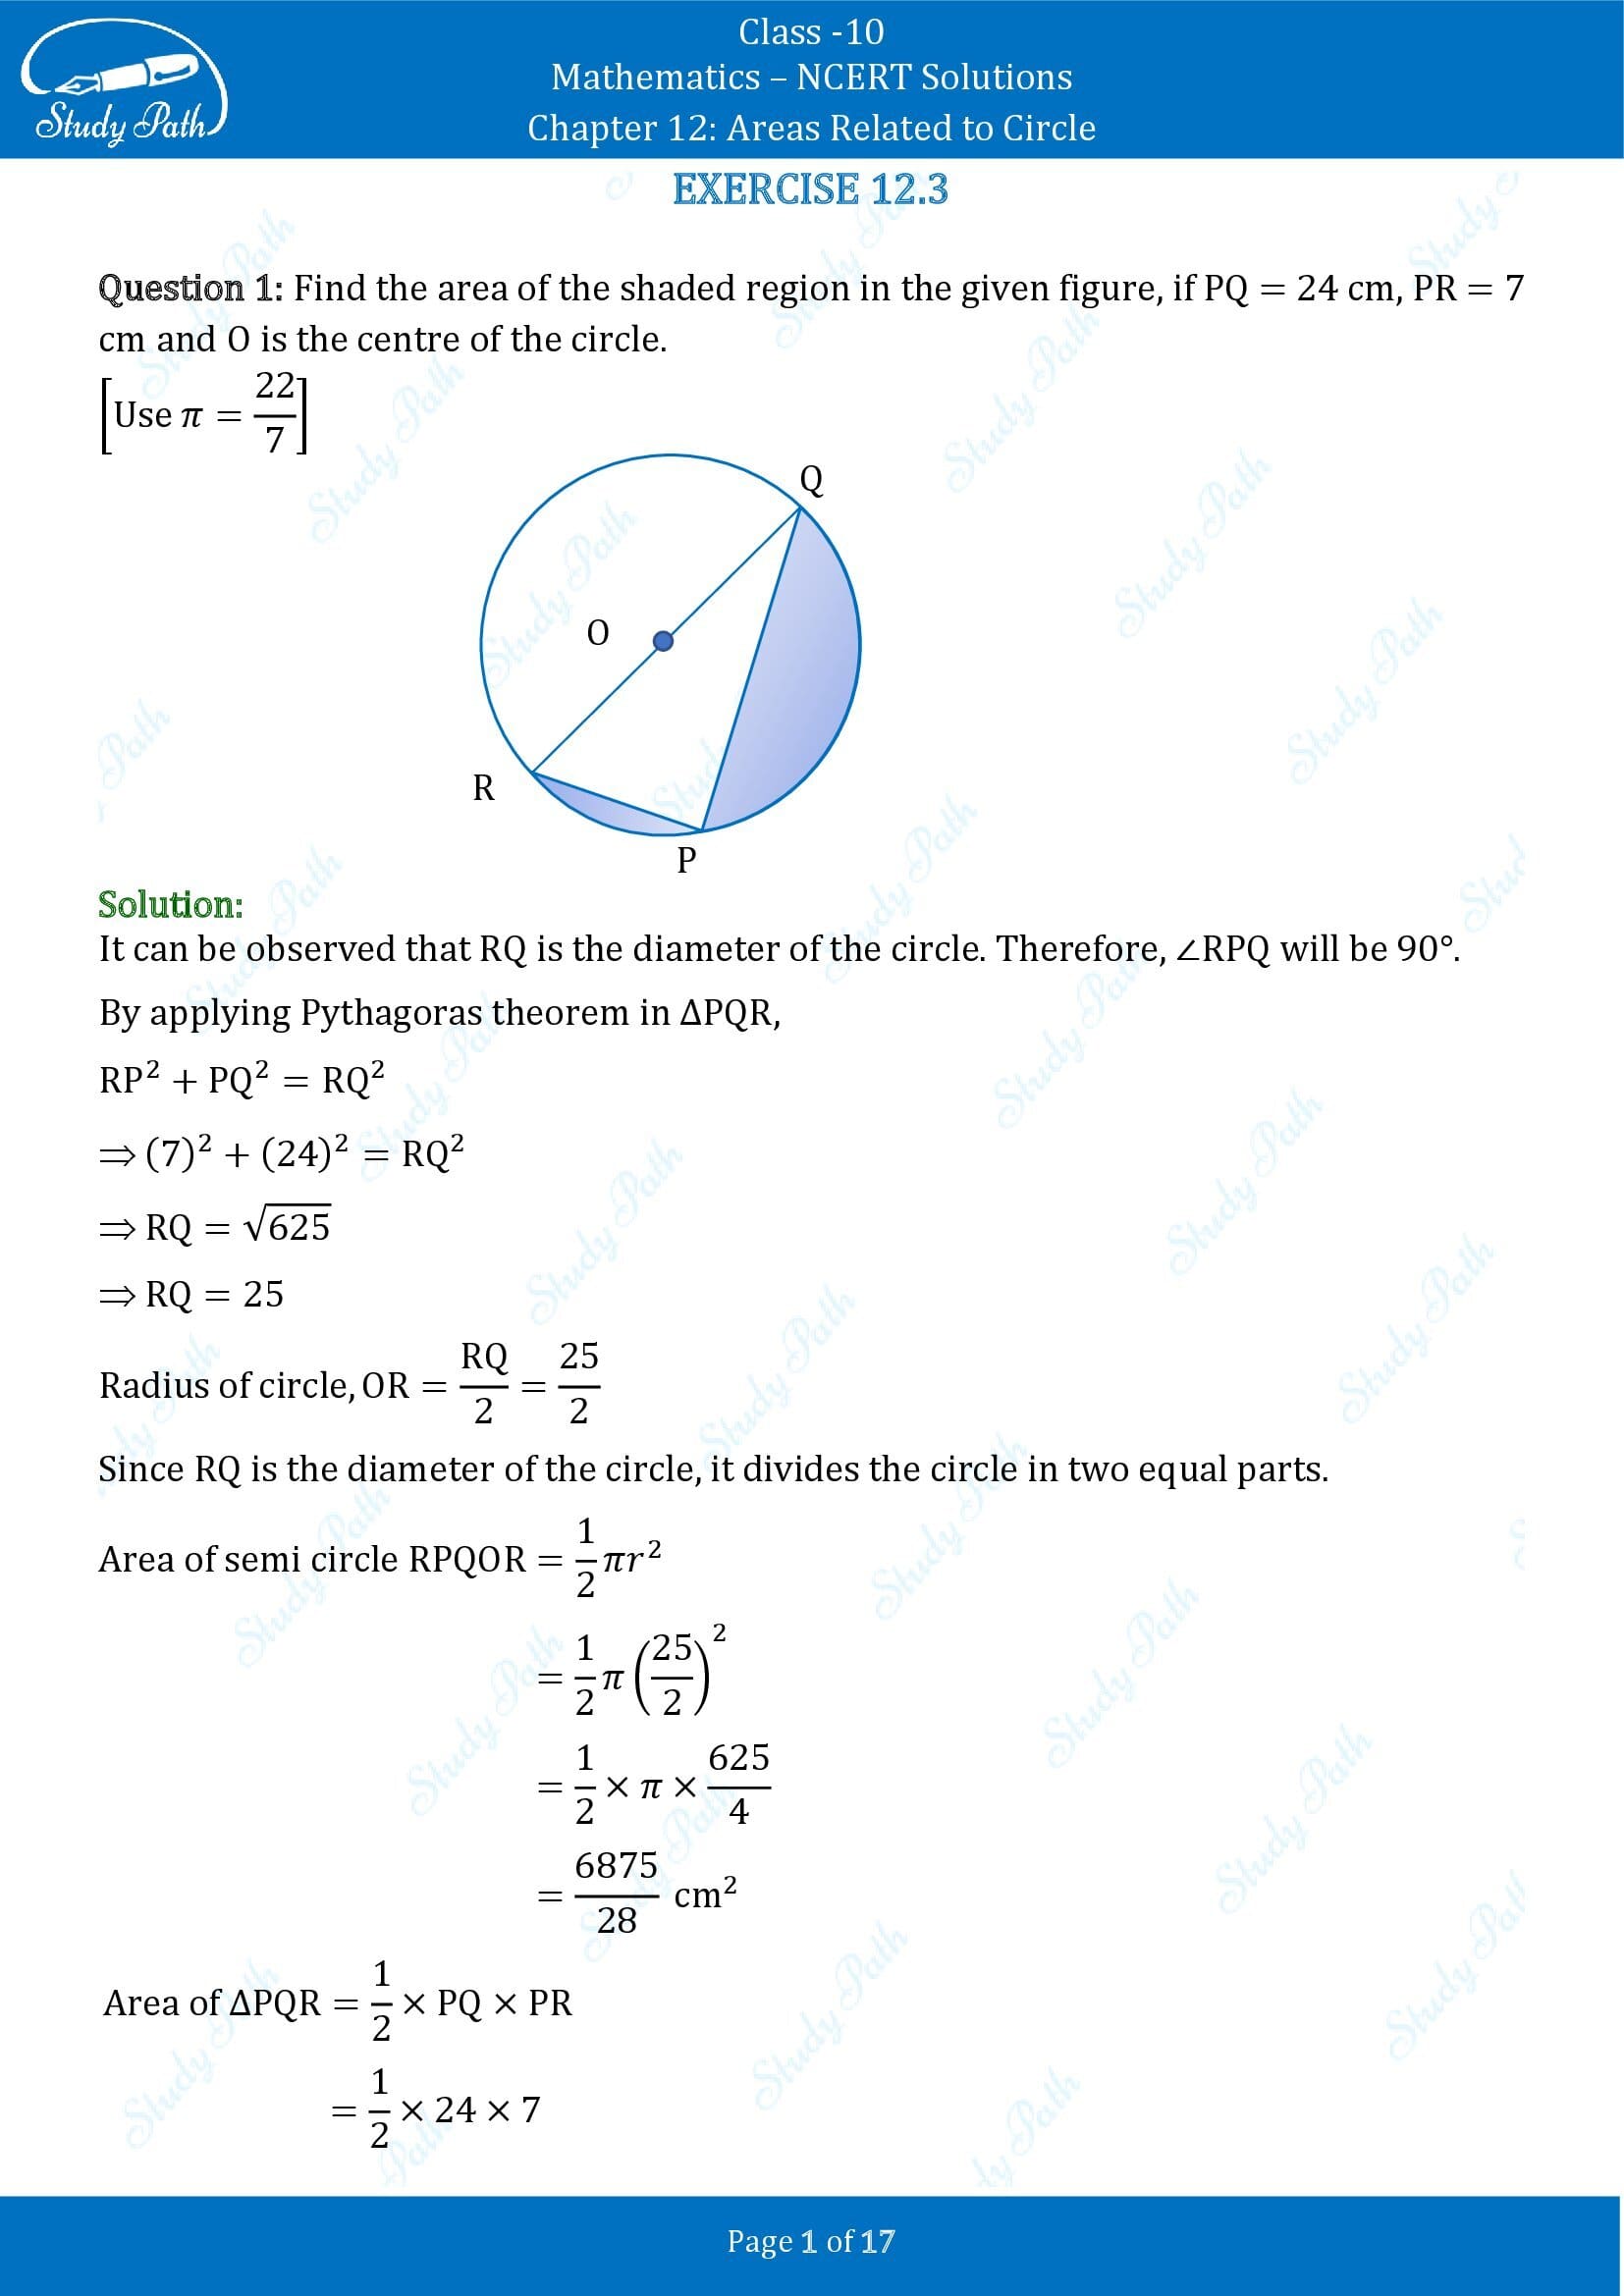 NCERT Solutions for Class 10 Maths Chapter 12 Areas Related to Circles Exercise 12.3 00001